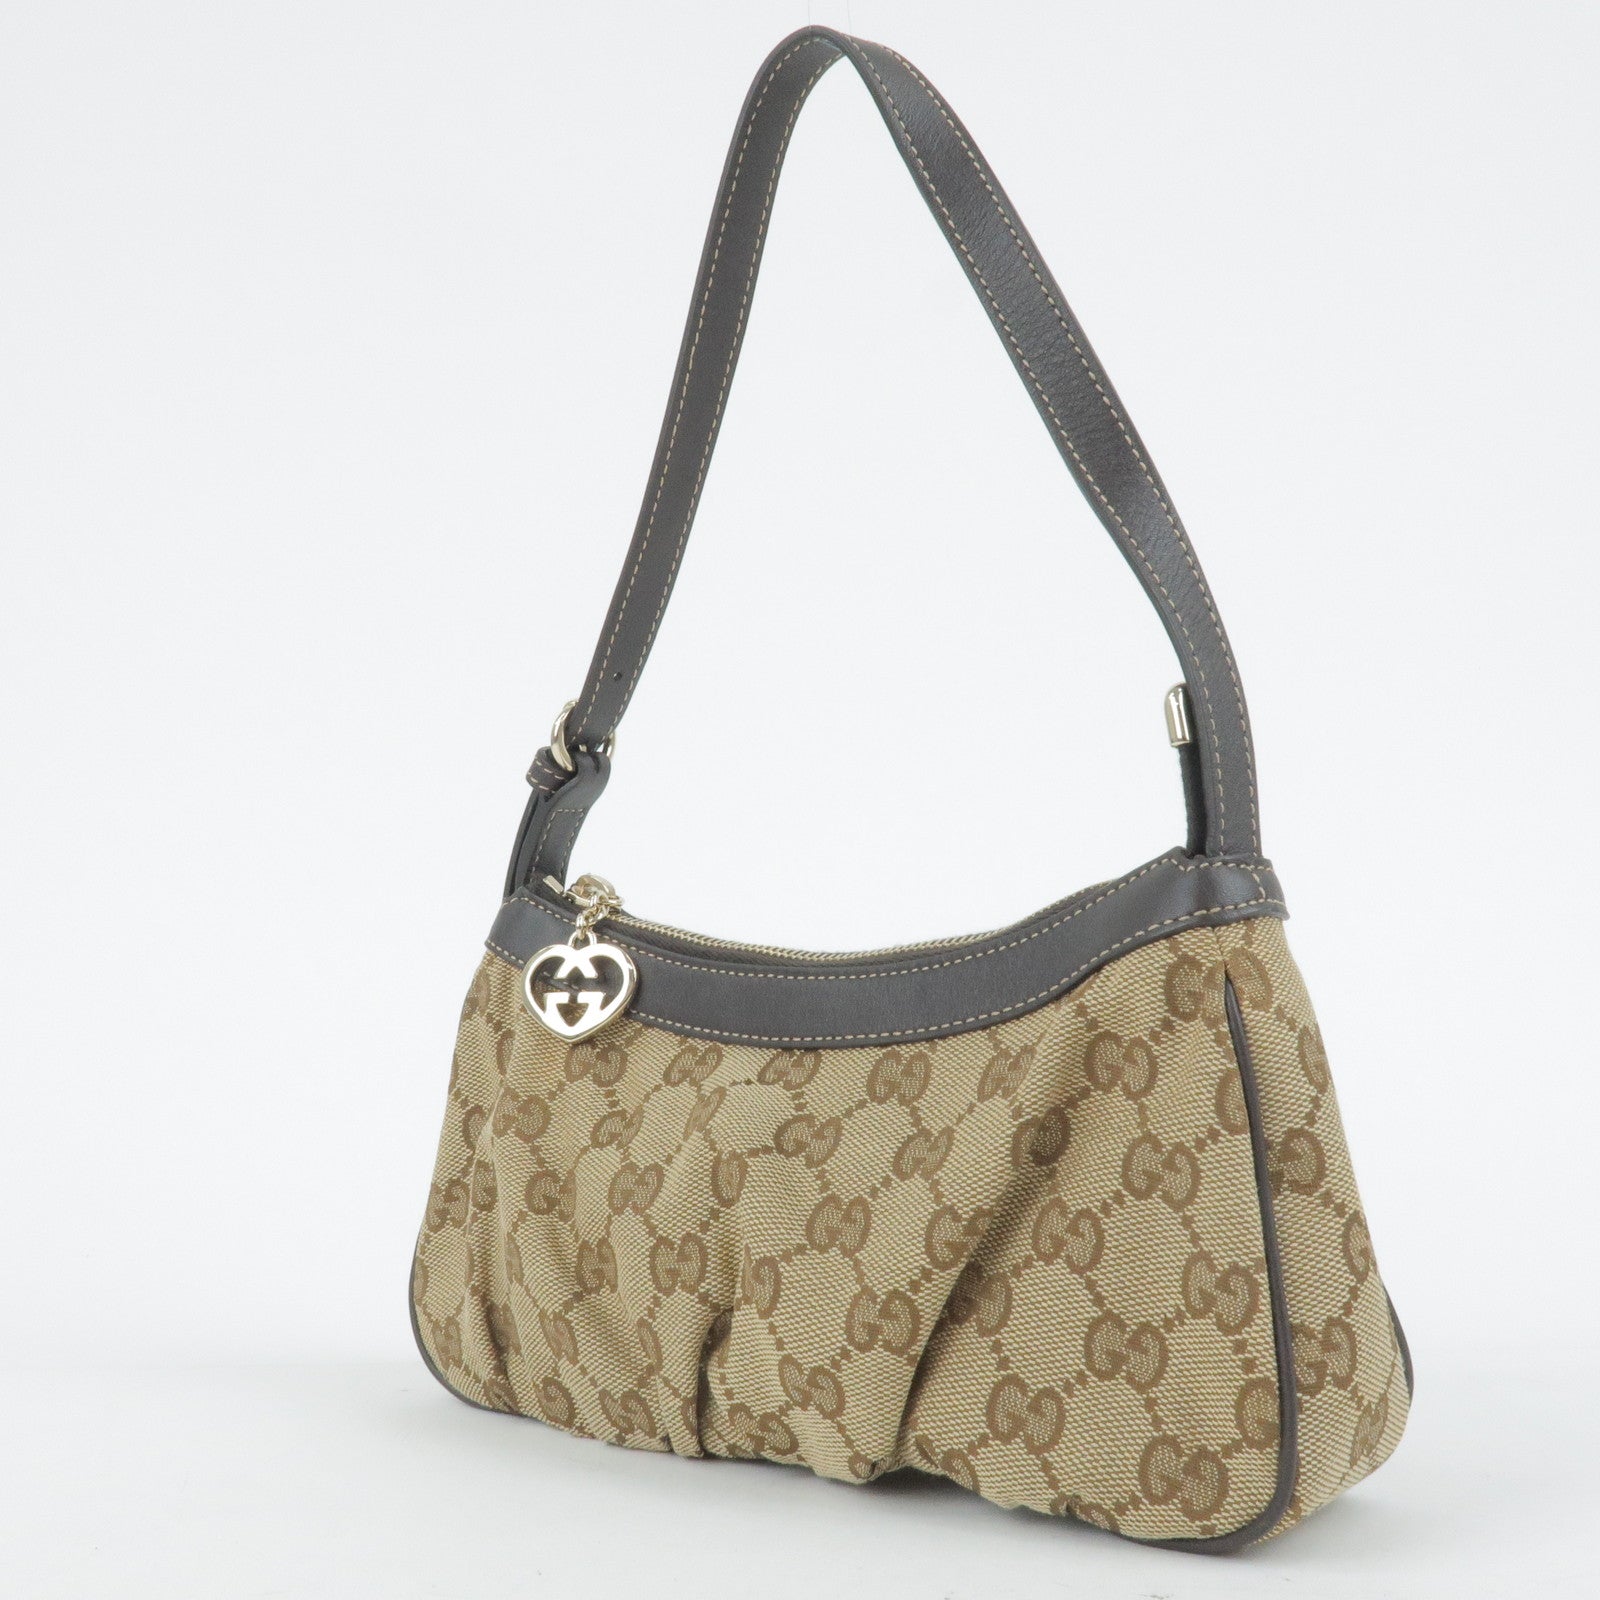 GUCCI-Lovely-GG-Canvas-Leather-Shoulder-Bag-Brown-245938 – dct 